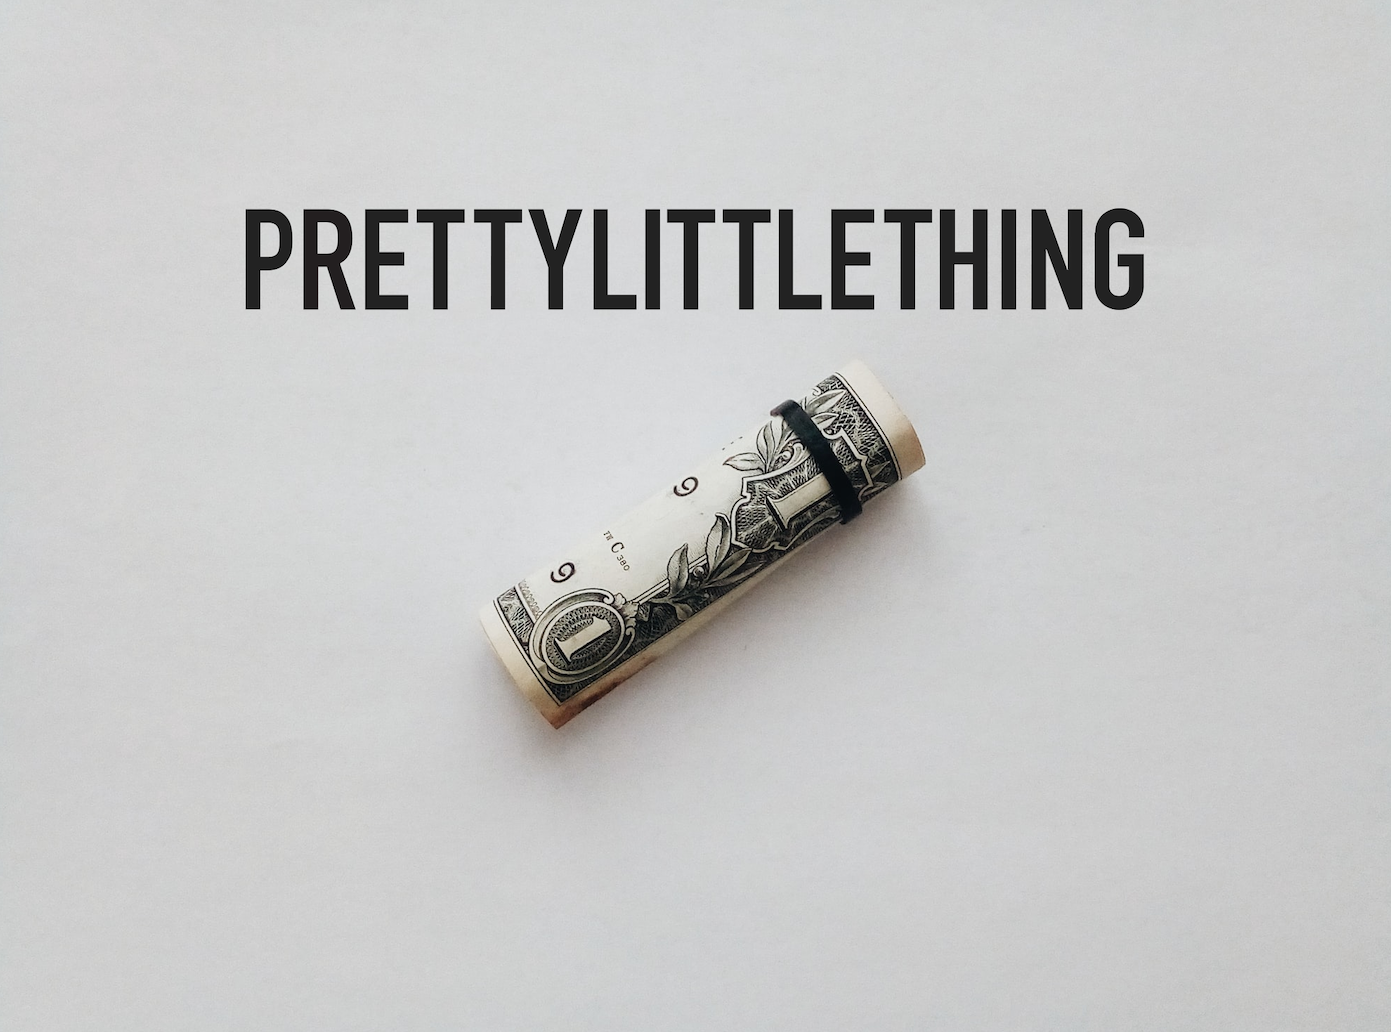 How to Get Price alerts on Prettylittlething